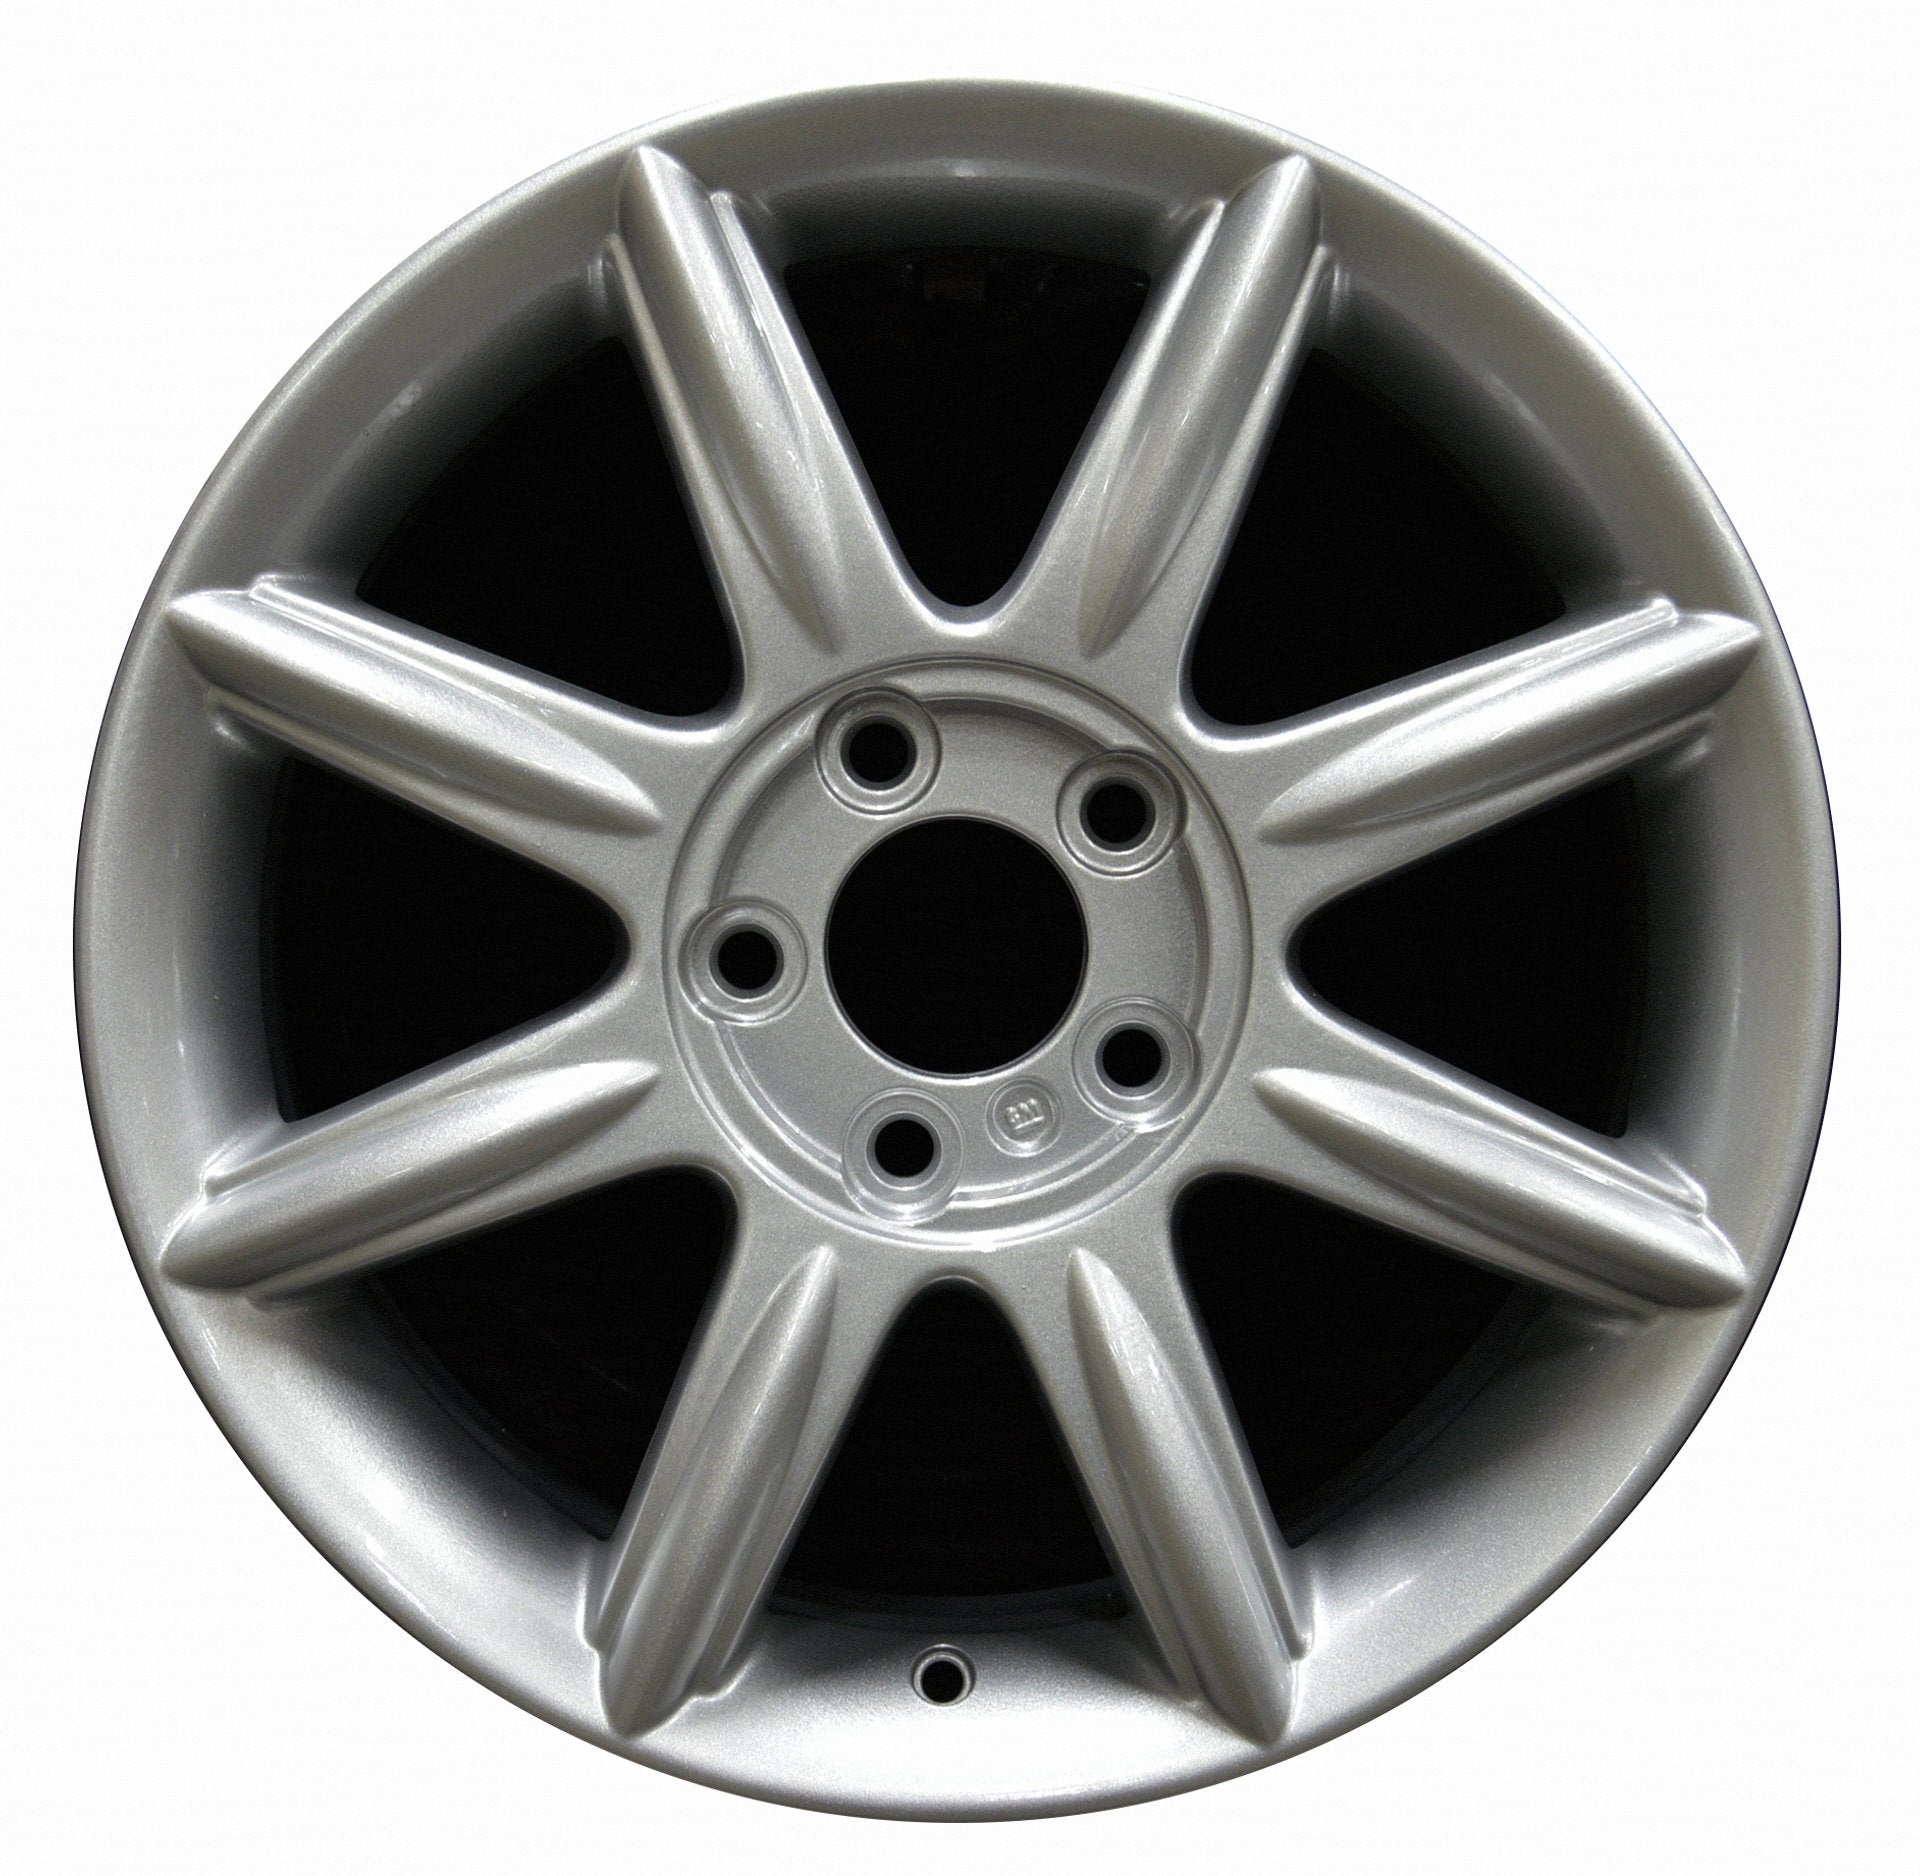 Buick Allure  2005, 2006, 2007, 2008 Factory OEM Car Wheel Size 17x6.5 Alloy WAO.4066.PS13.FF